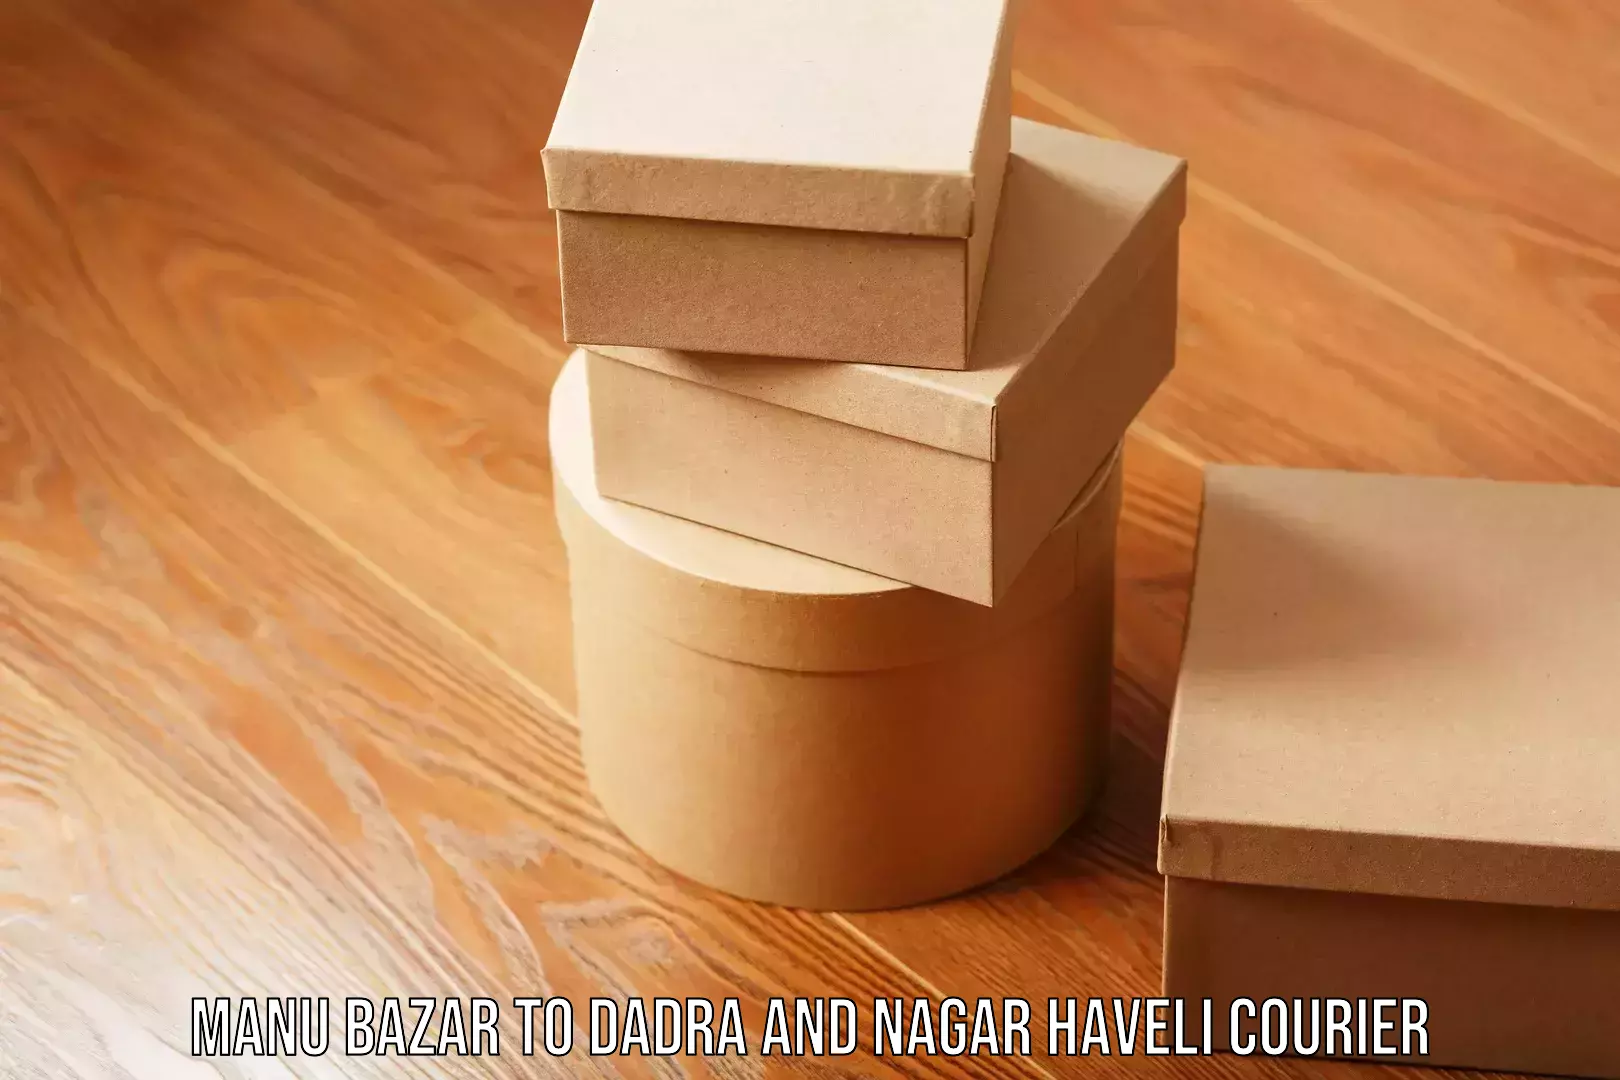 Automated parcel services Manu Bazar to Dadra and Nagar Haveli